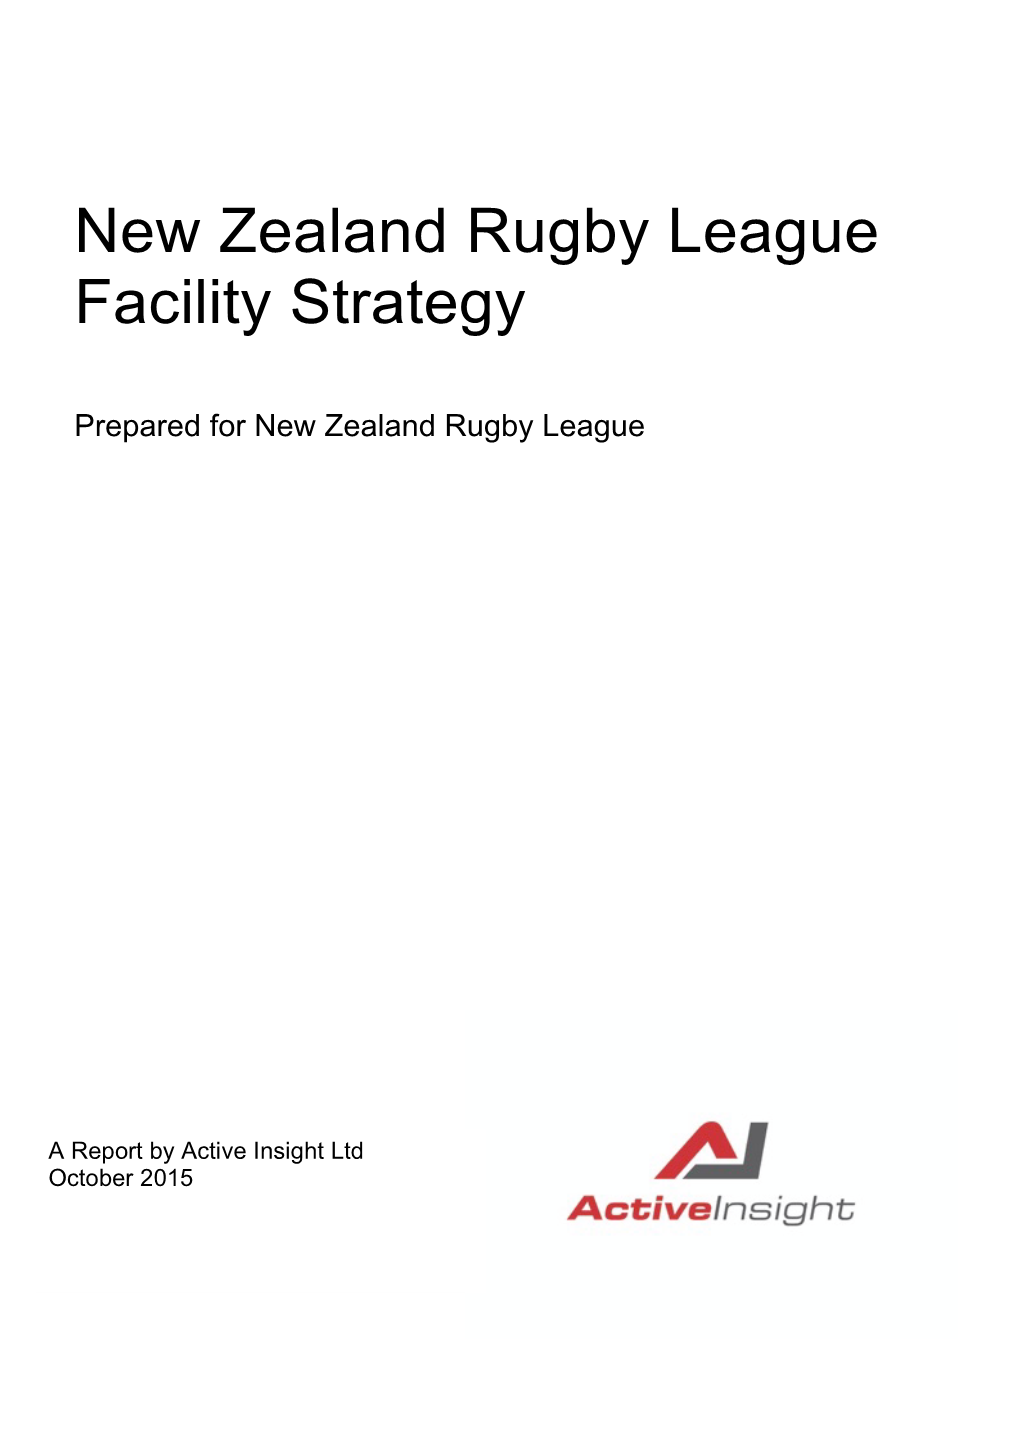 New Zealand Rugby League Facility Strategy